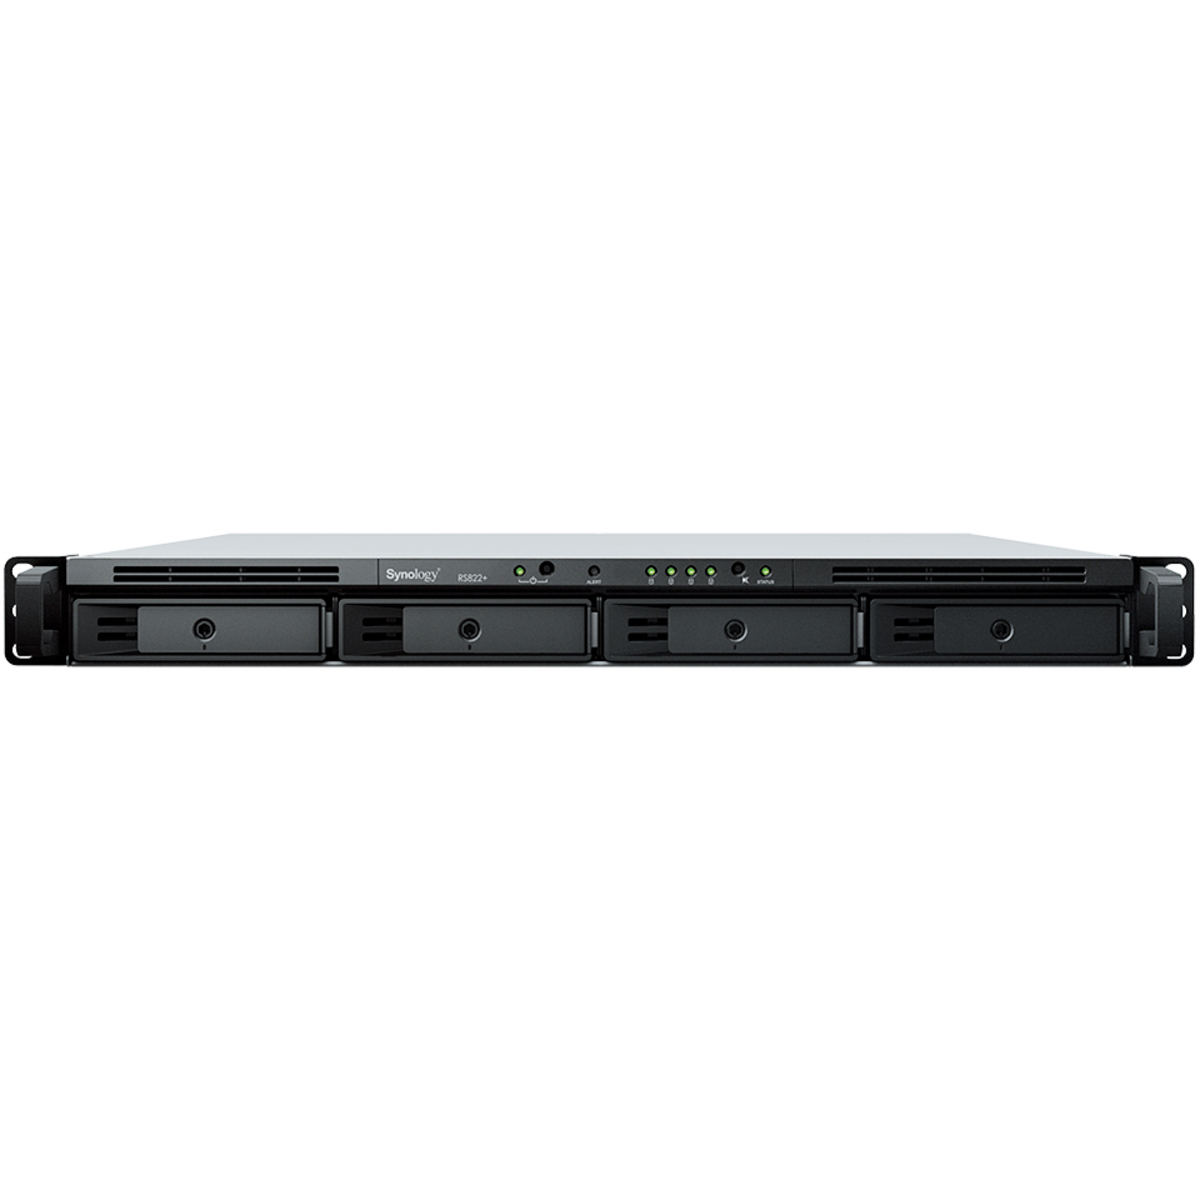 Synology RackStation RS822+ 16tb 4-Bay RackMount Multimedia / Power User / Business NAS - Network Attached Storage Device 2x8tb Western Digital Ultrastar DC HC320 HUS728T8TALE6L4 3.5 7200rpm SATA 6Gb/s HDD ENTERPRISE Class Drives Installed - Burn-In Tested RackStation RS822+